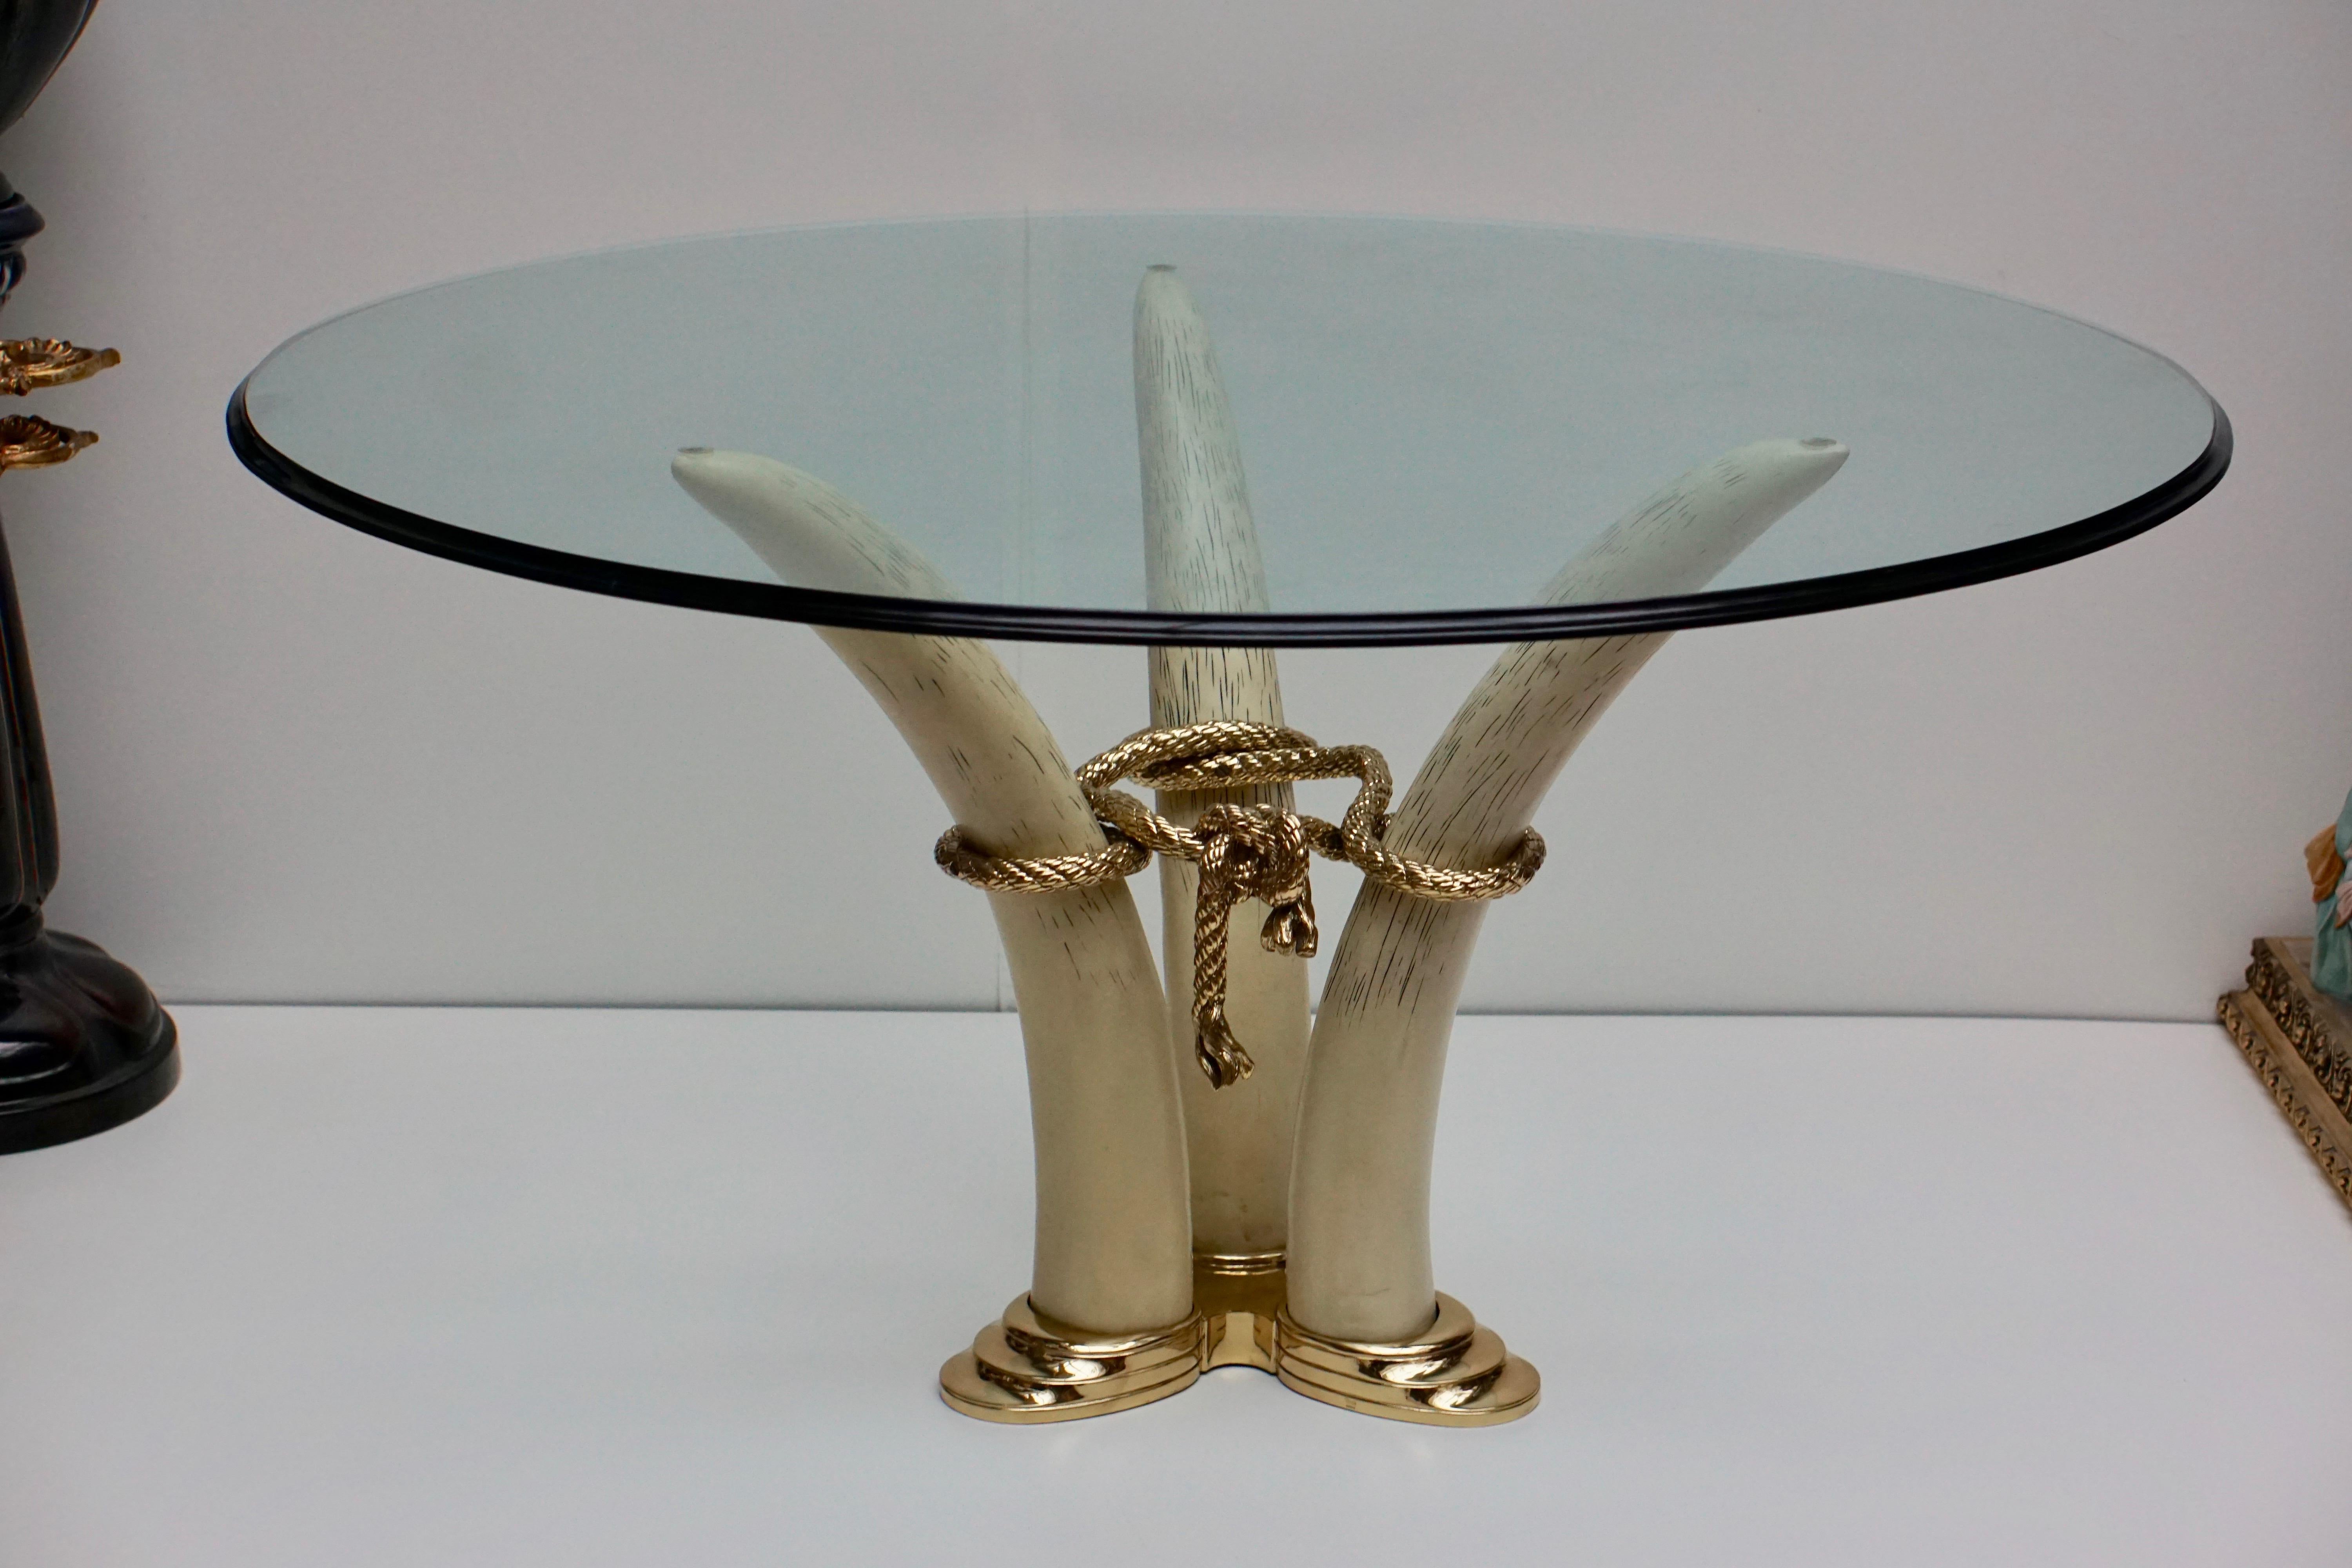 Mid-Century Modern Hollywood Regency Dining Table by Valenti, Barcelona, Spain, circa 1970-1980 For Sale